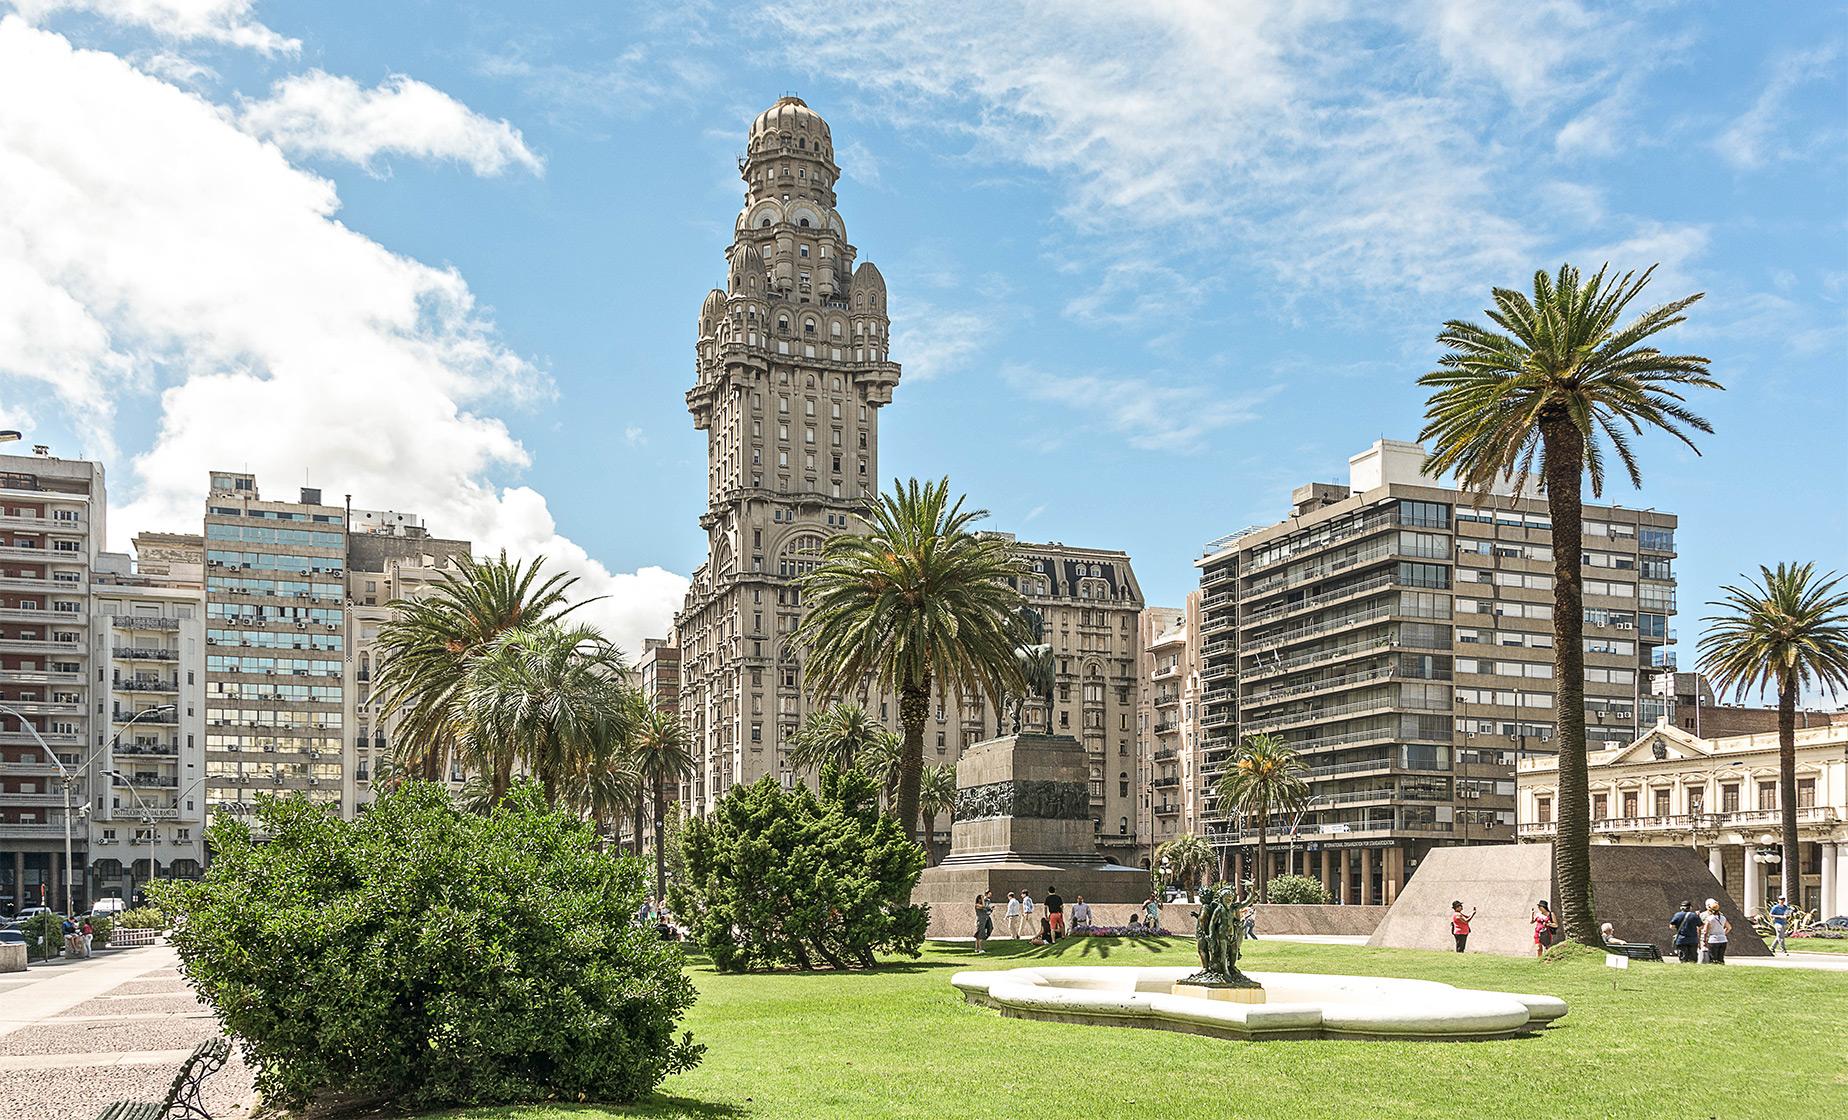 Exclusive Best of Montevideo Tour (Old Town, Port Market, Parliament Palace and the Rambla)